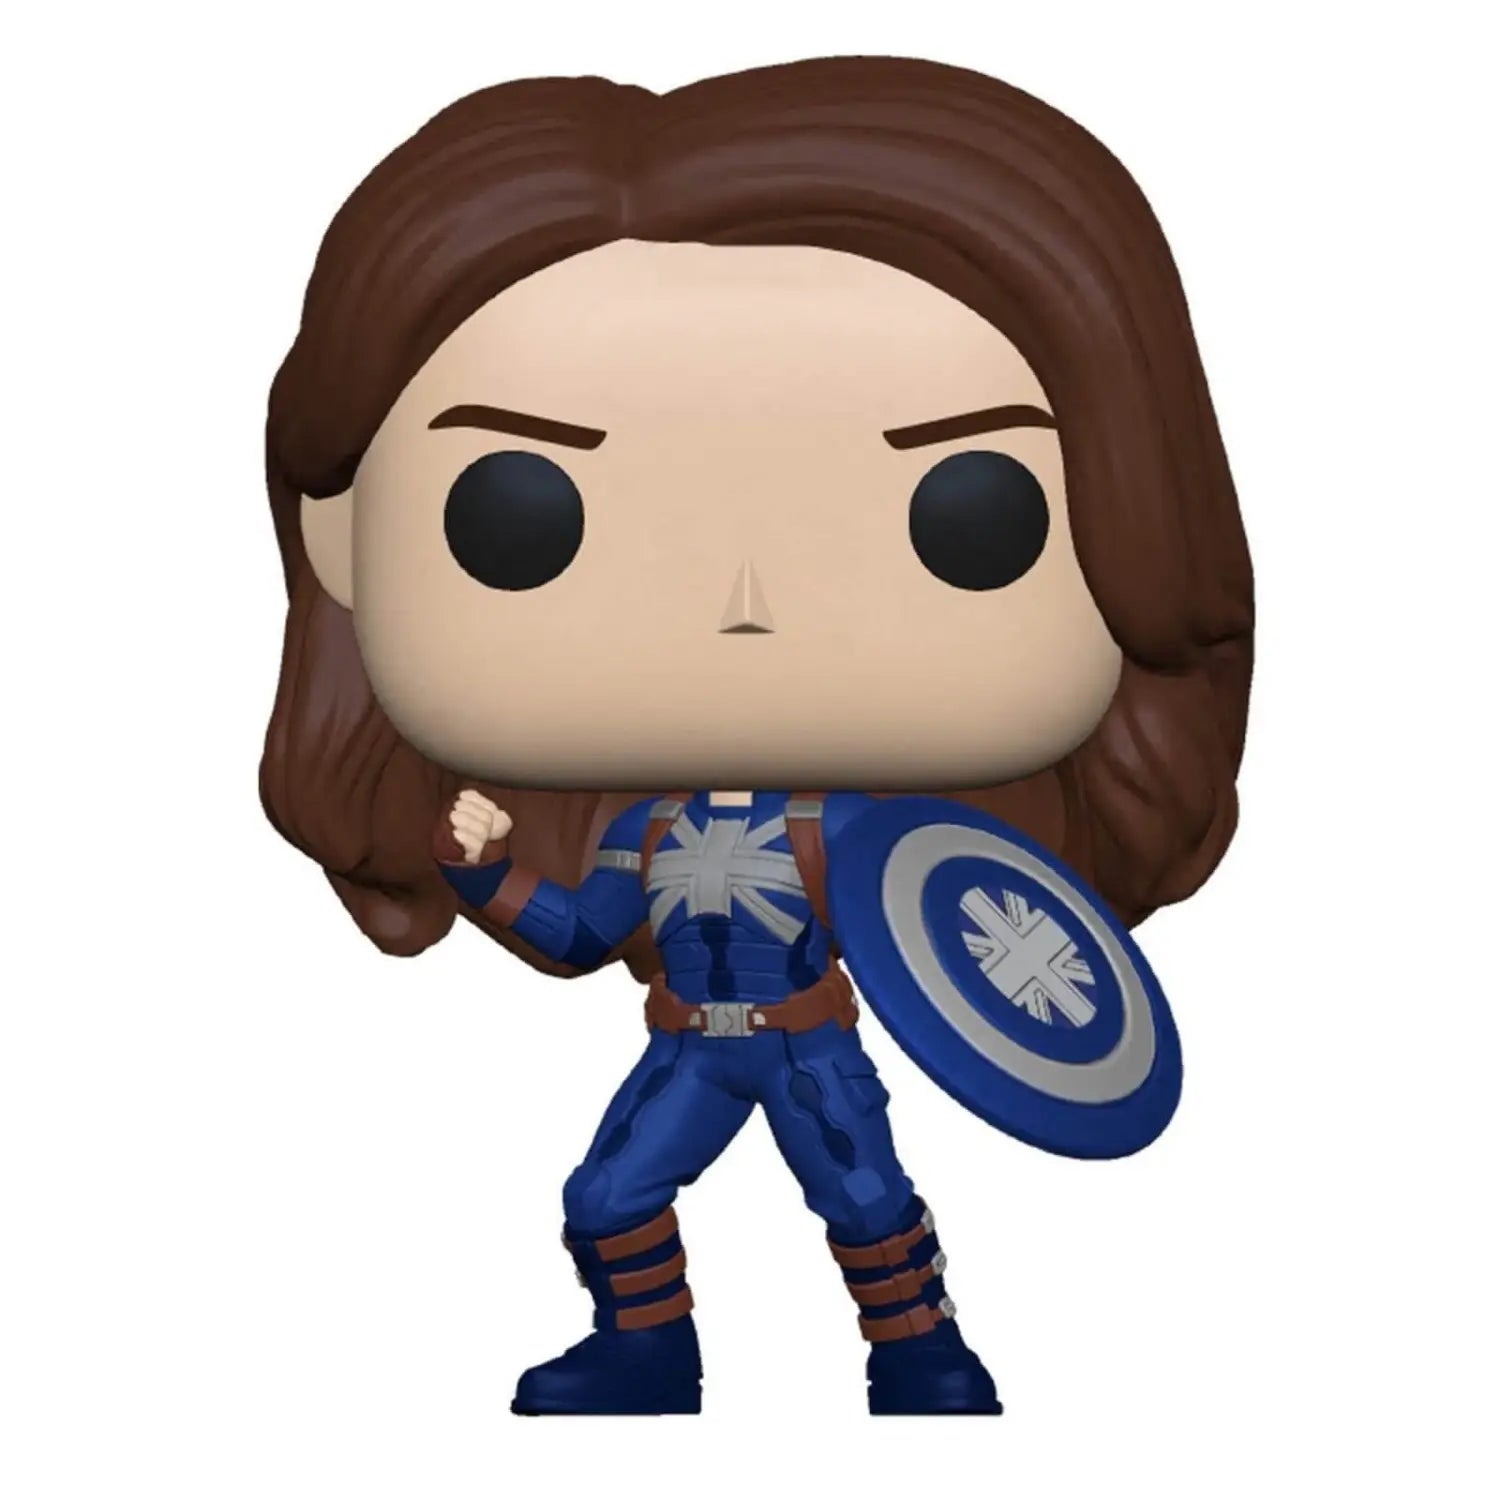 Funko Pop! Marvel What If…? Captain Carter Stealth Suit - BumbleToys - 18+, Action Figures, Boys, Characters, Disney, Funko, Girls, Pre-Order